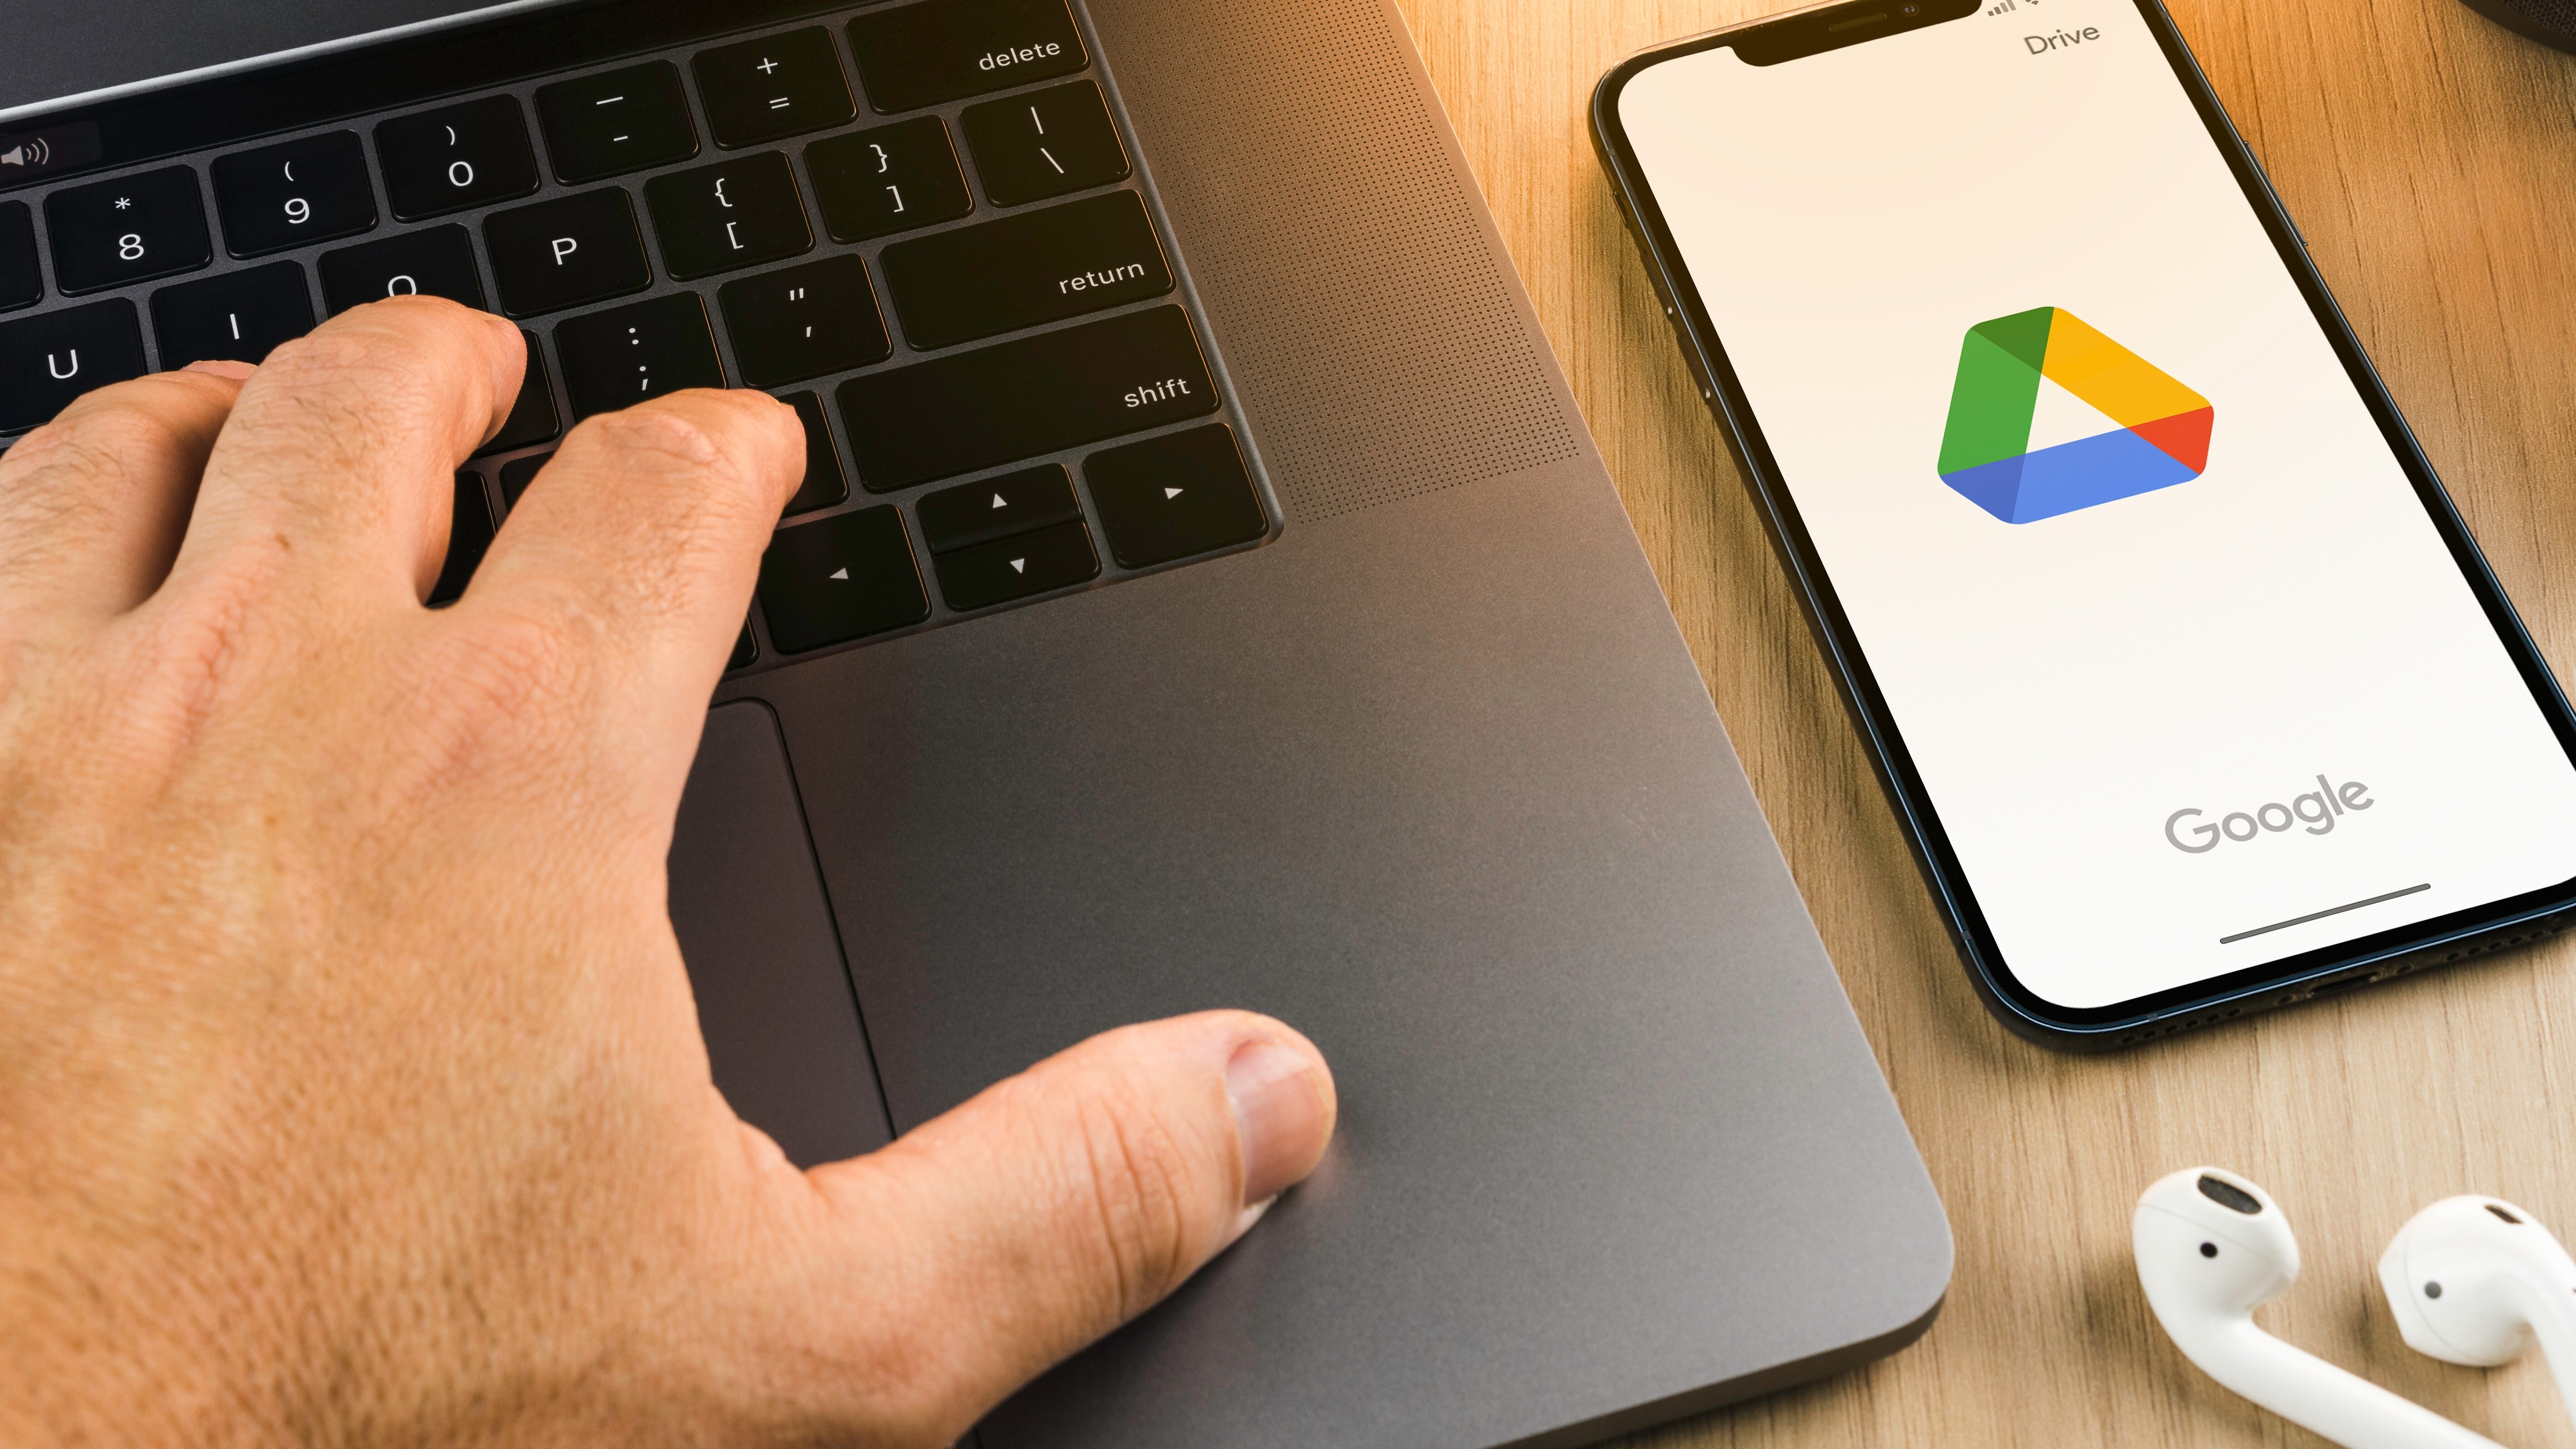 Losing Files And Data From Google Drive? Here Is What Google Said